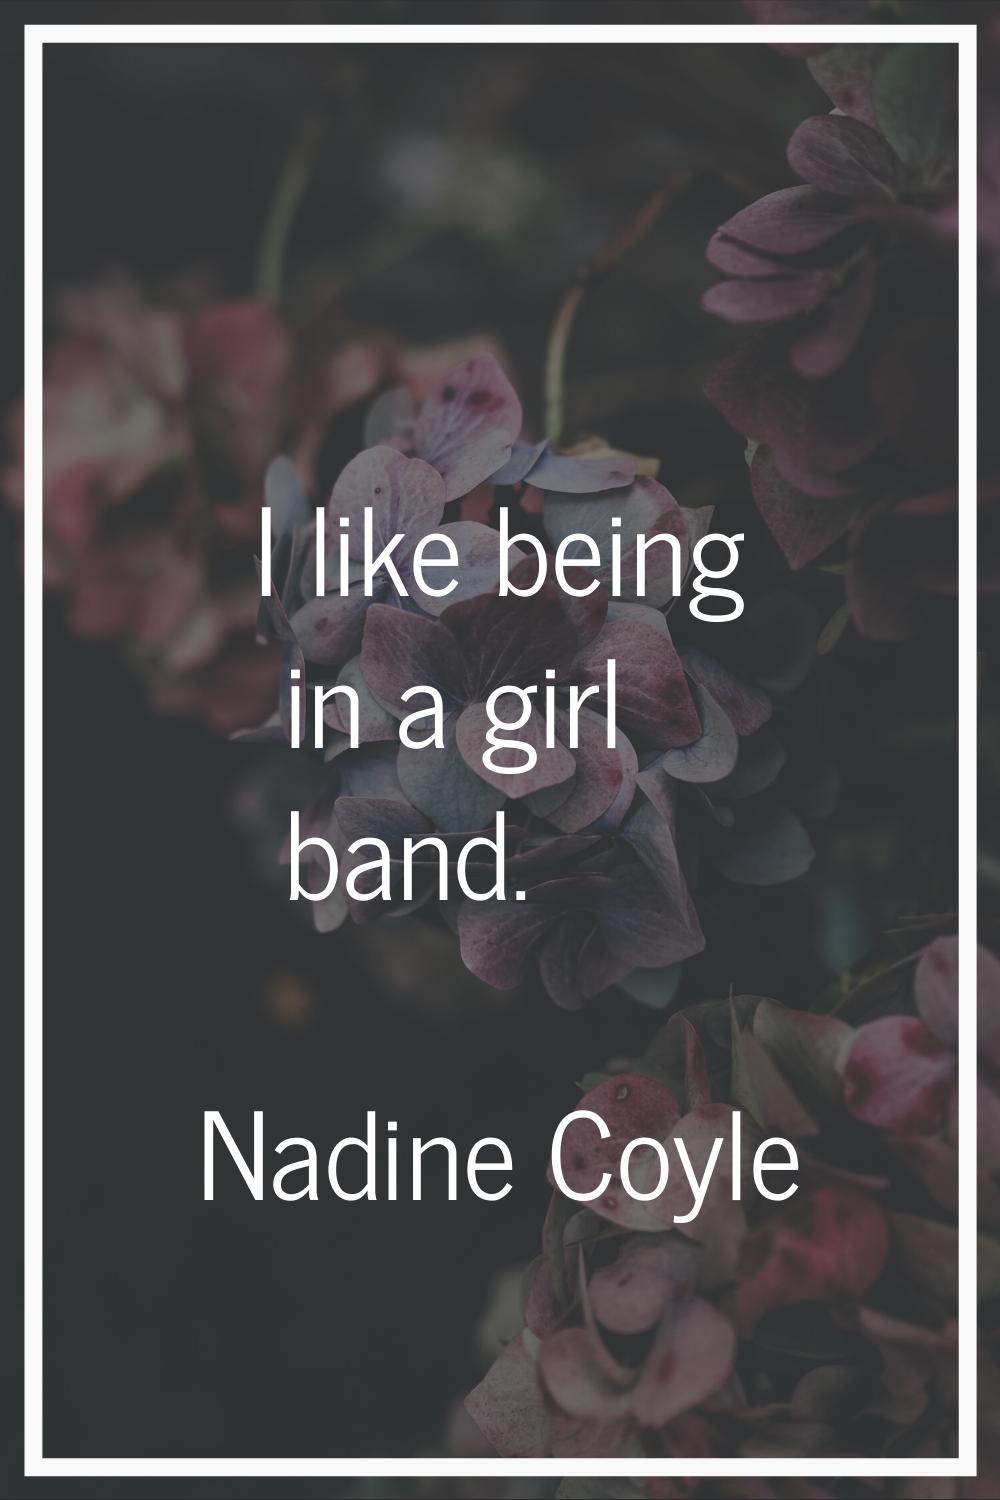 I like being in a girl band.